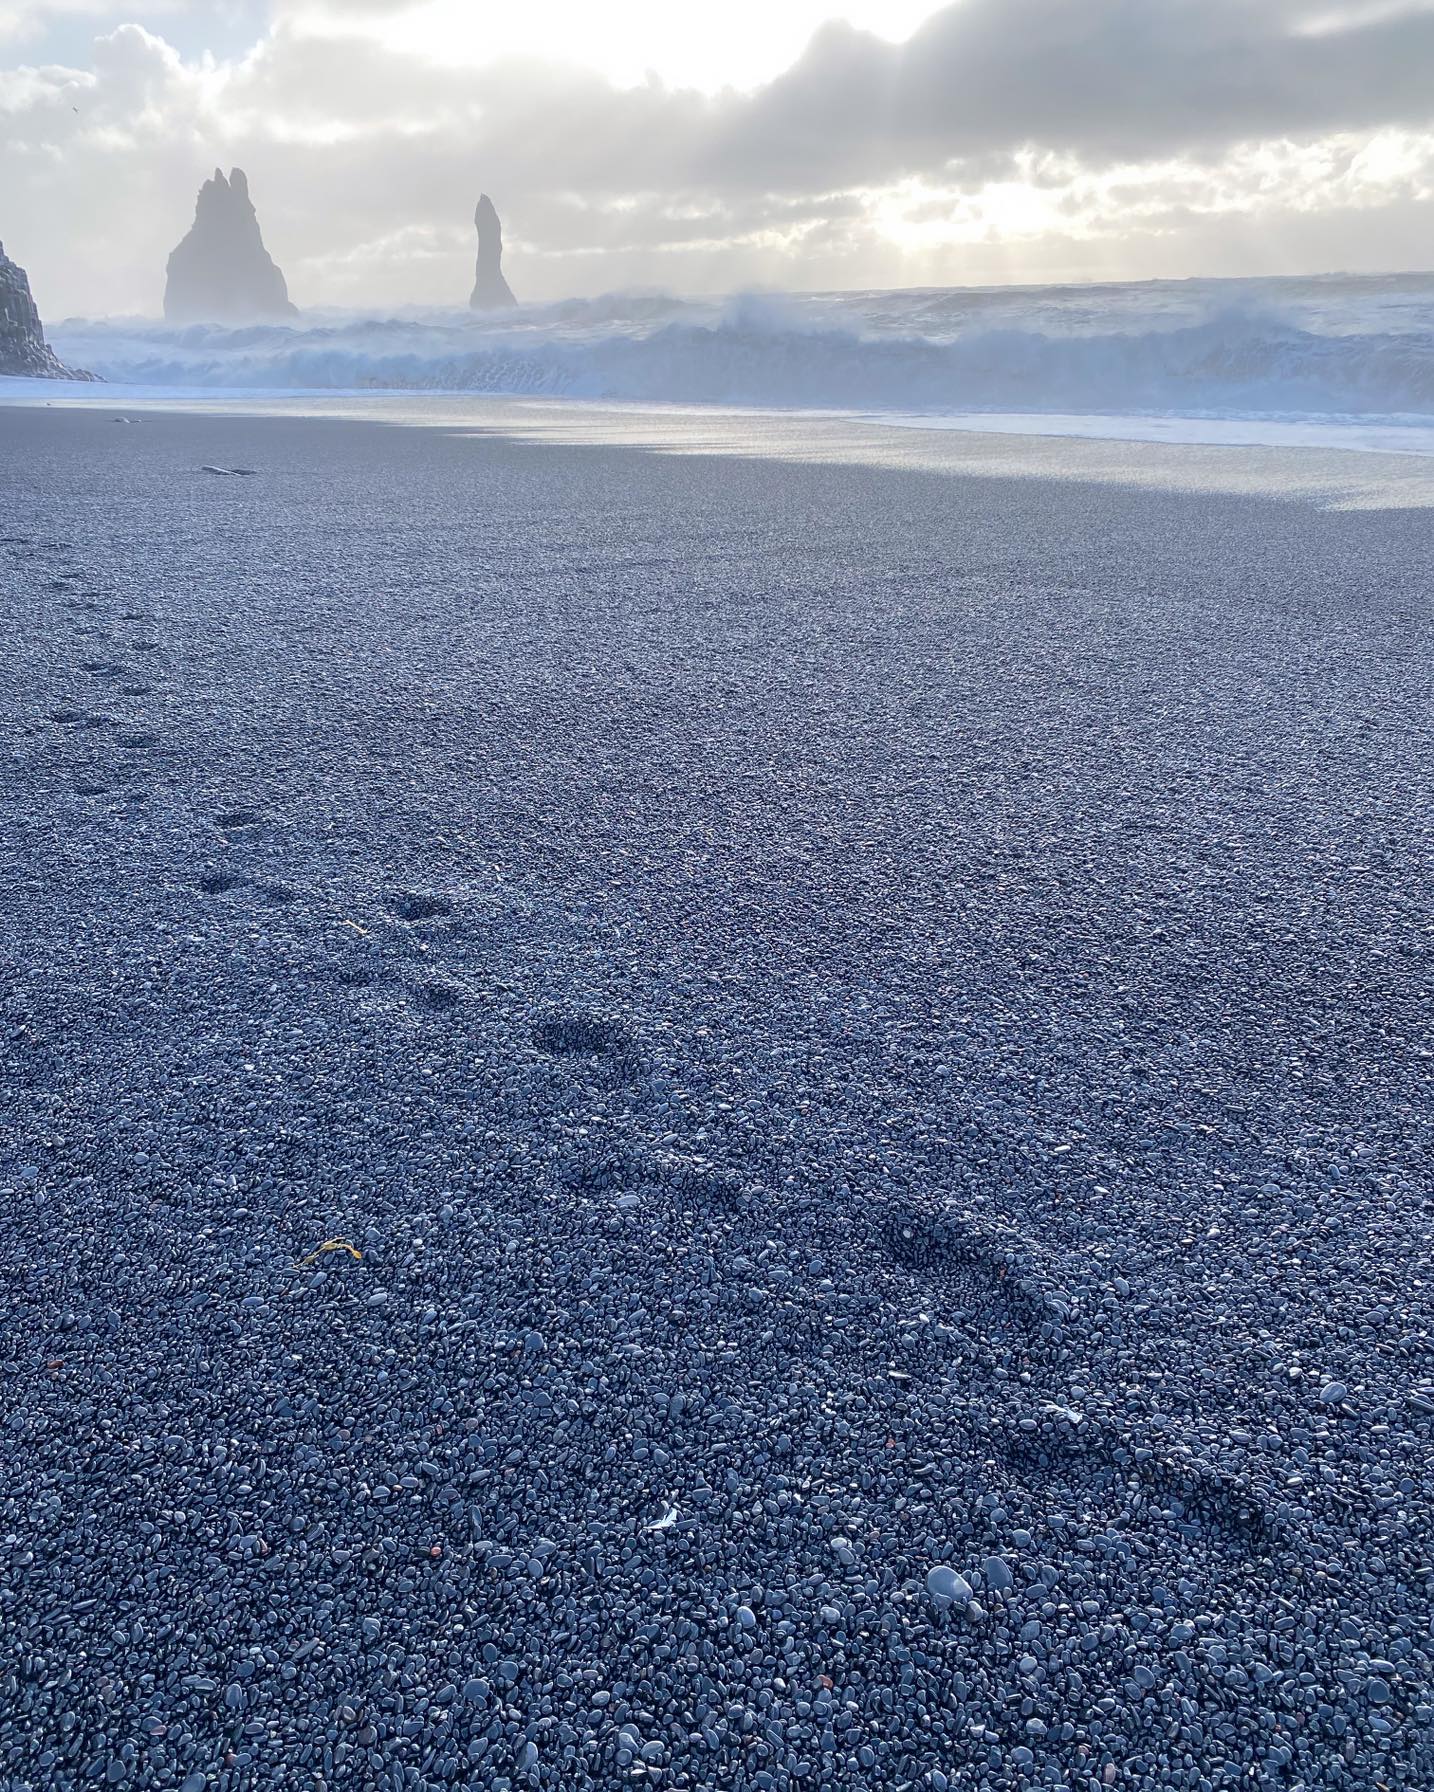 Footsteps on volcanic beach